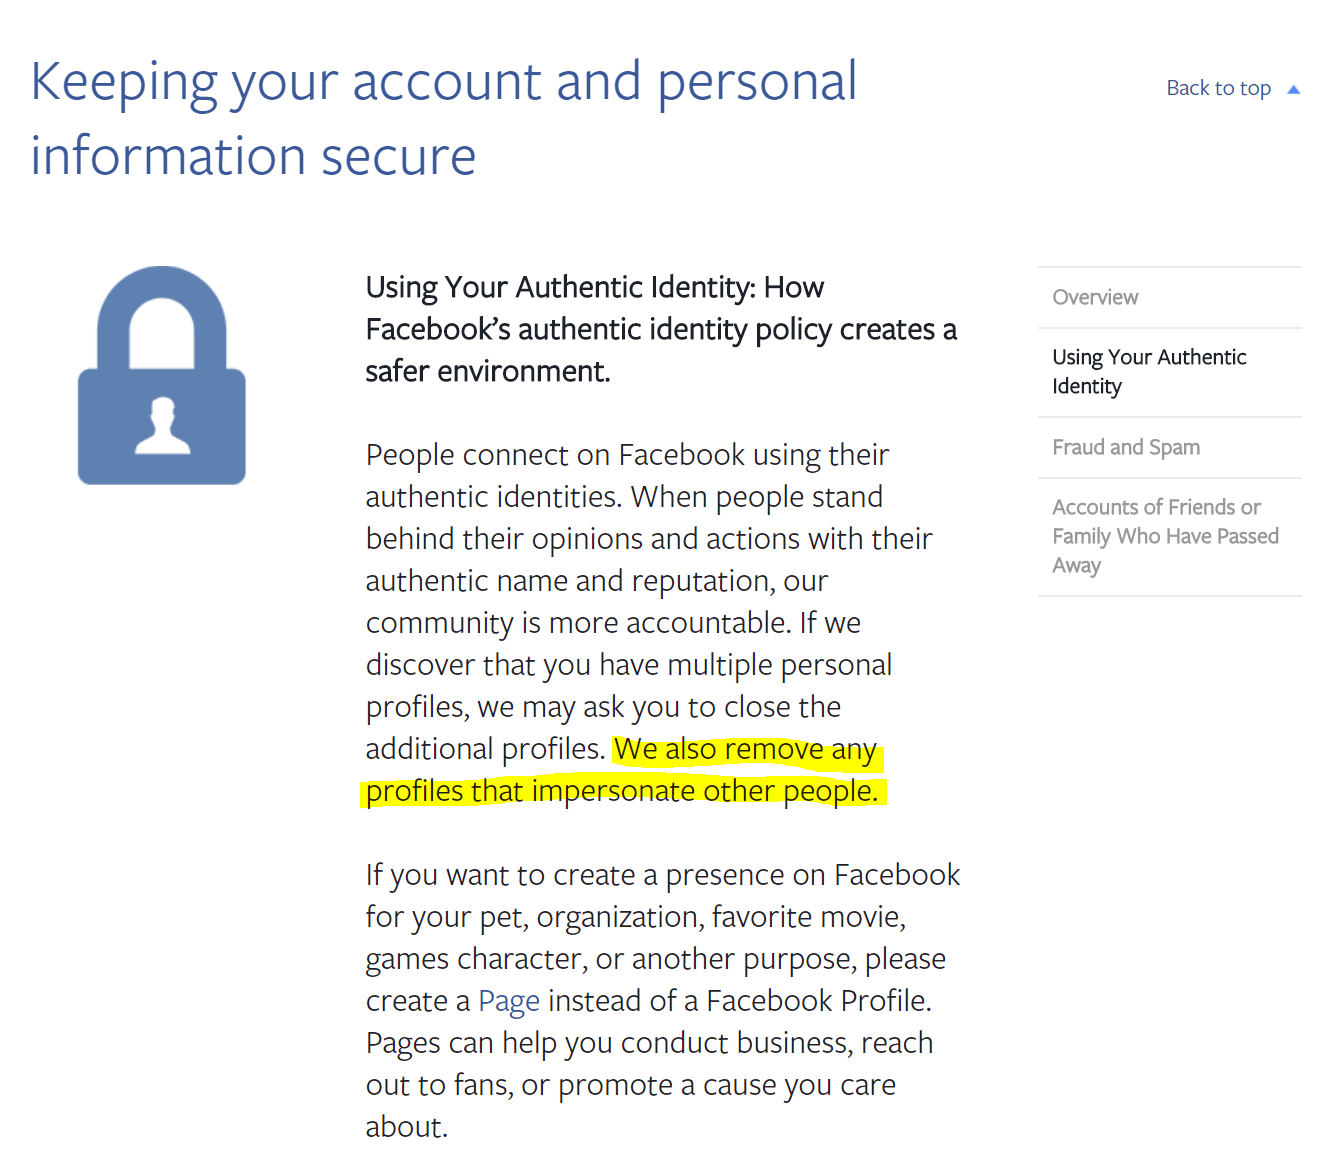 You Can Now Have Multiple Personal Profiles on Facebook